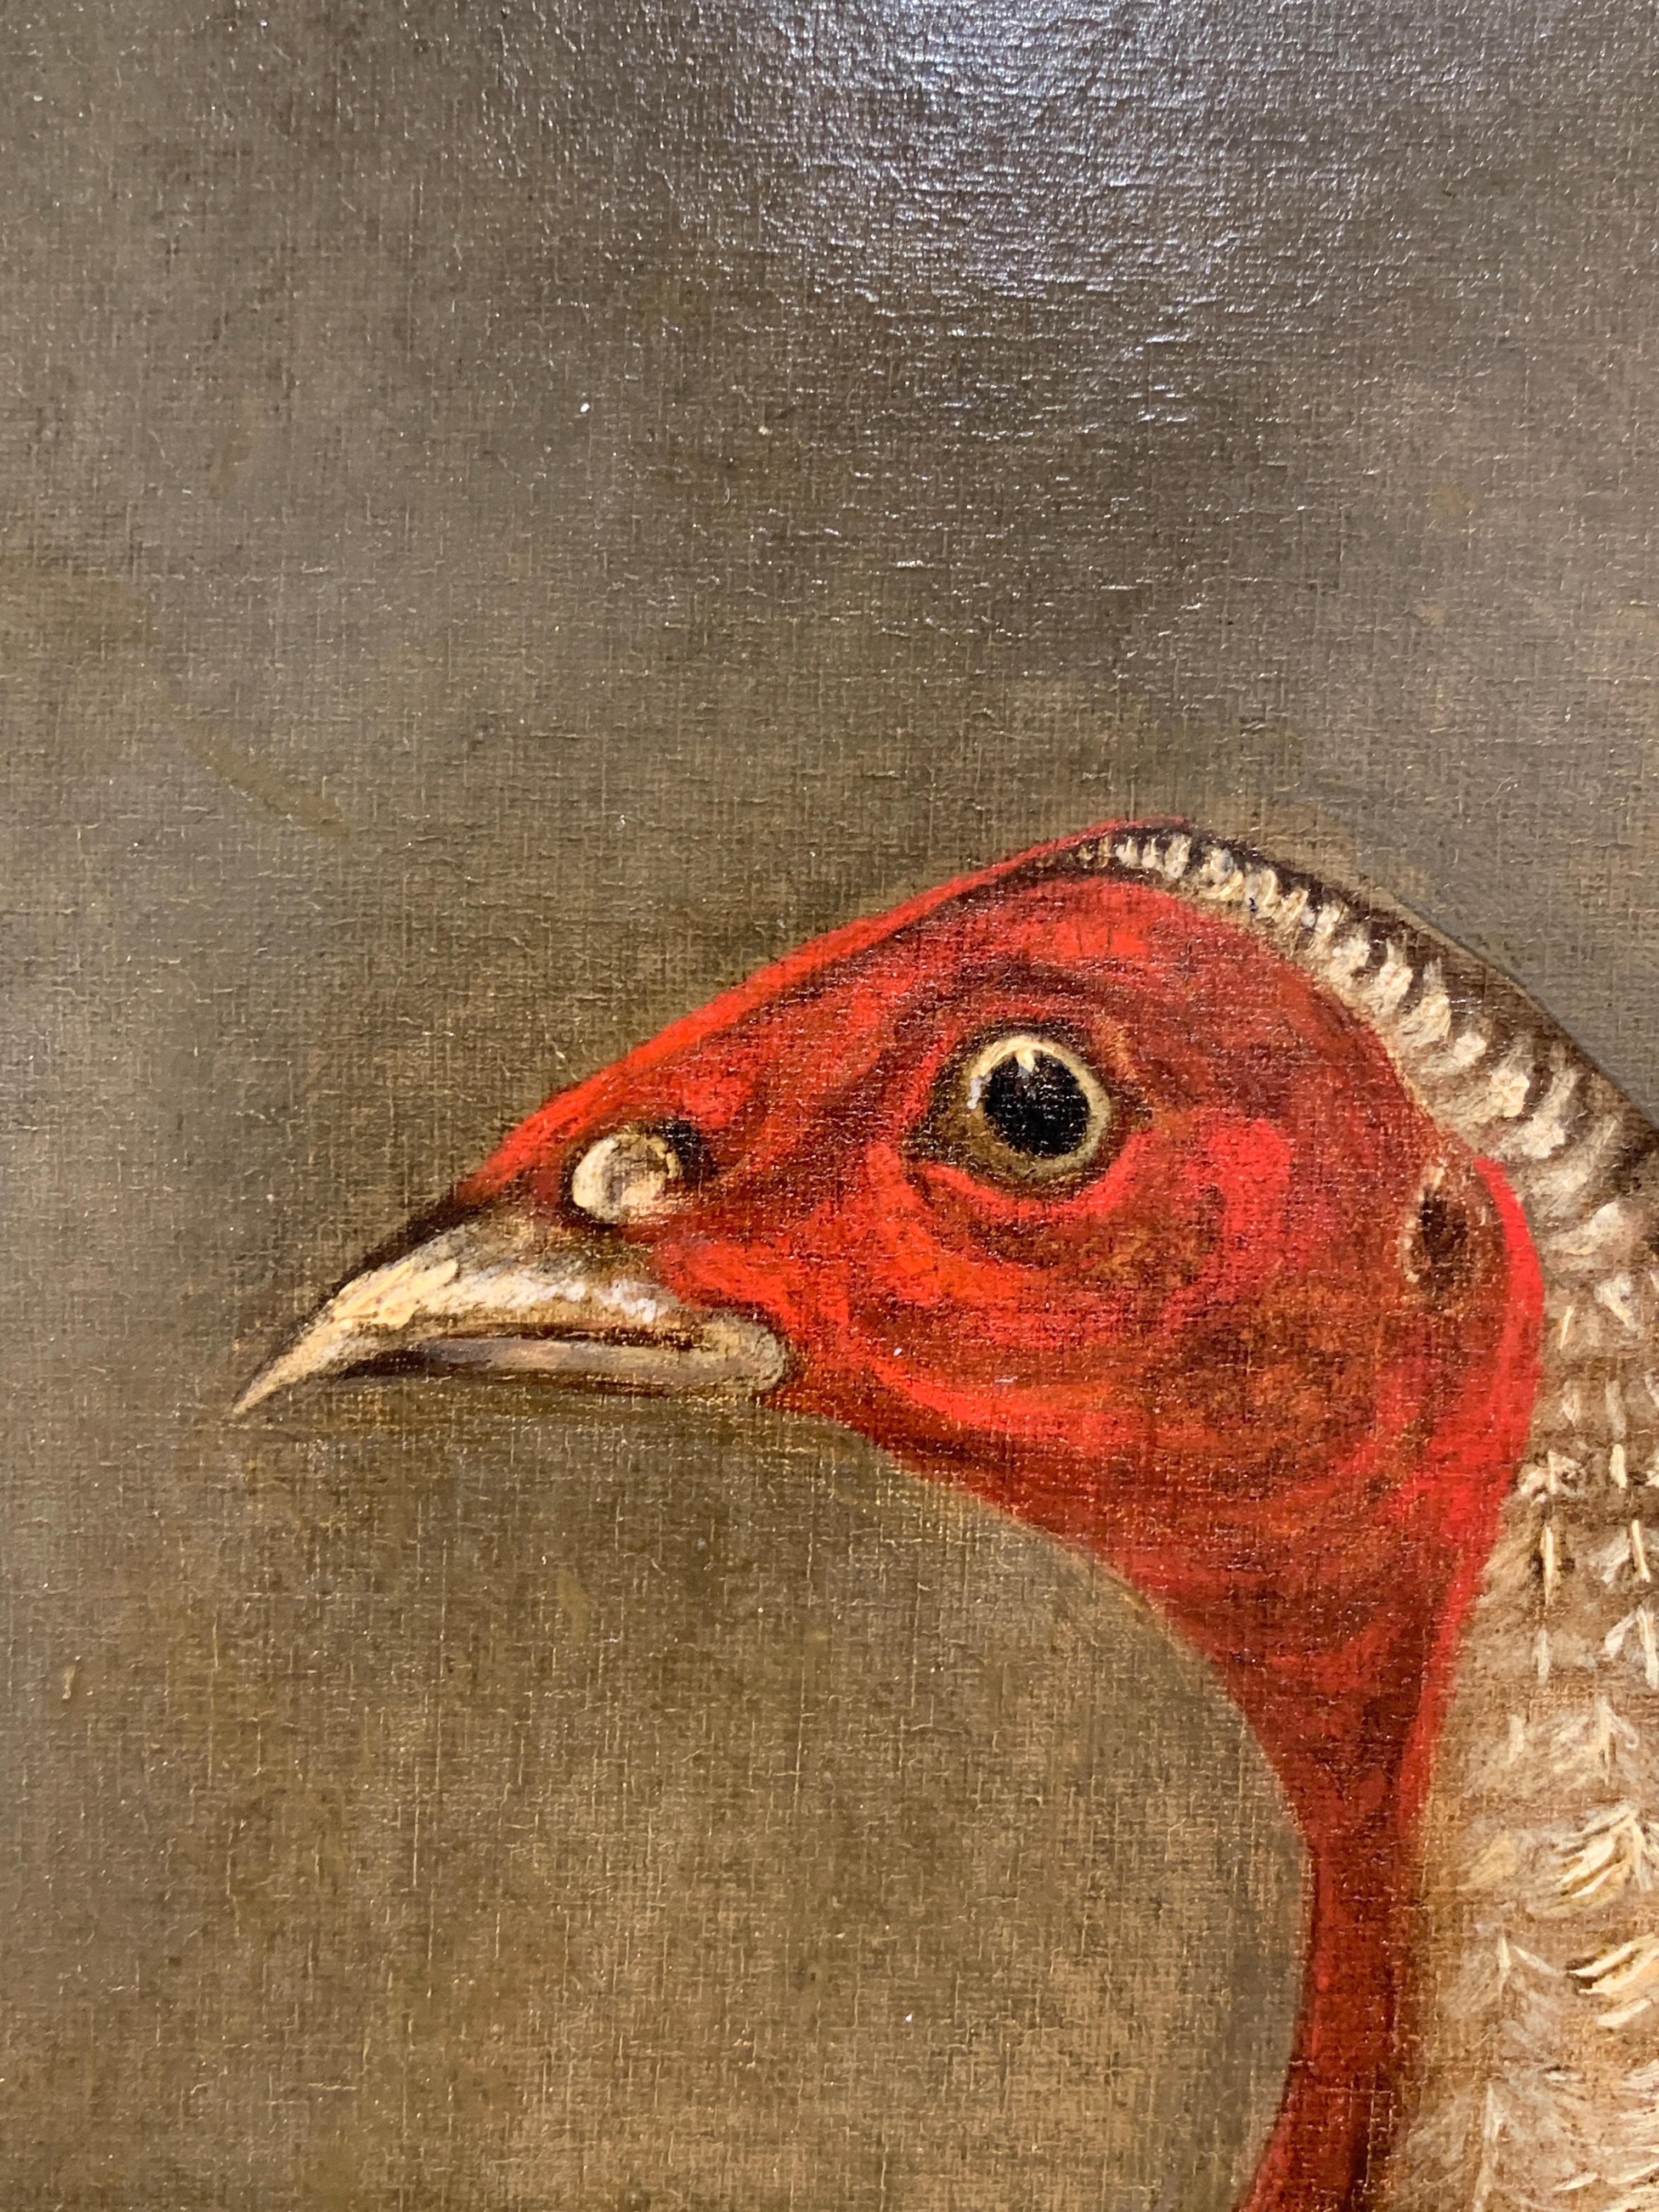 19th Century English portrait of a Fighting Game Cock, with Spurs - Brown Animal Painting by Ben Marshall